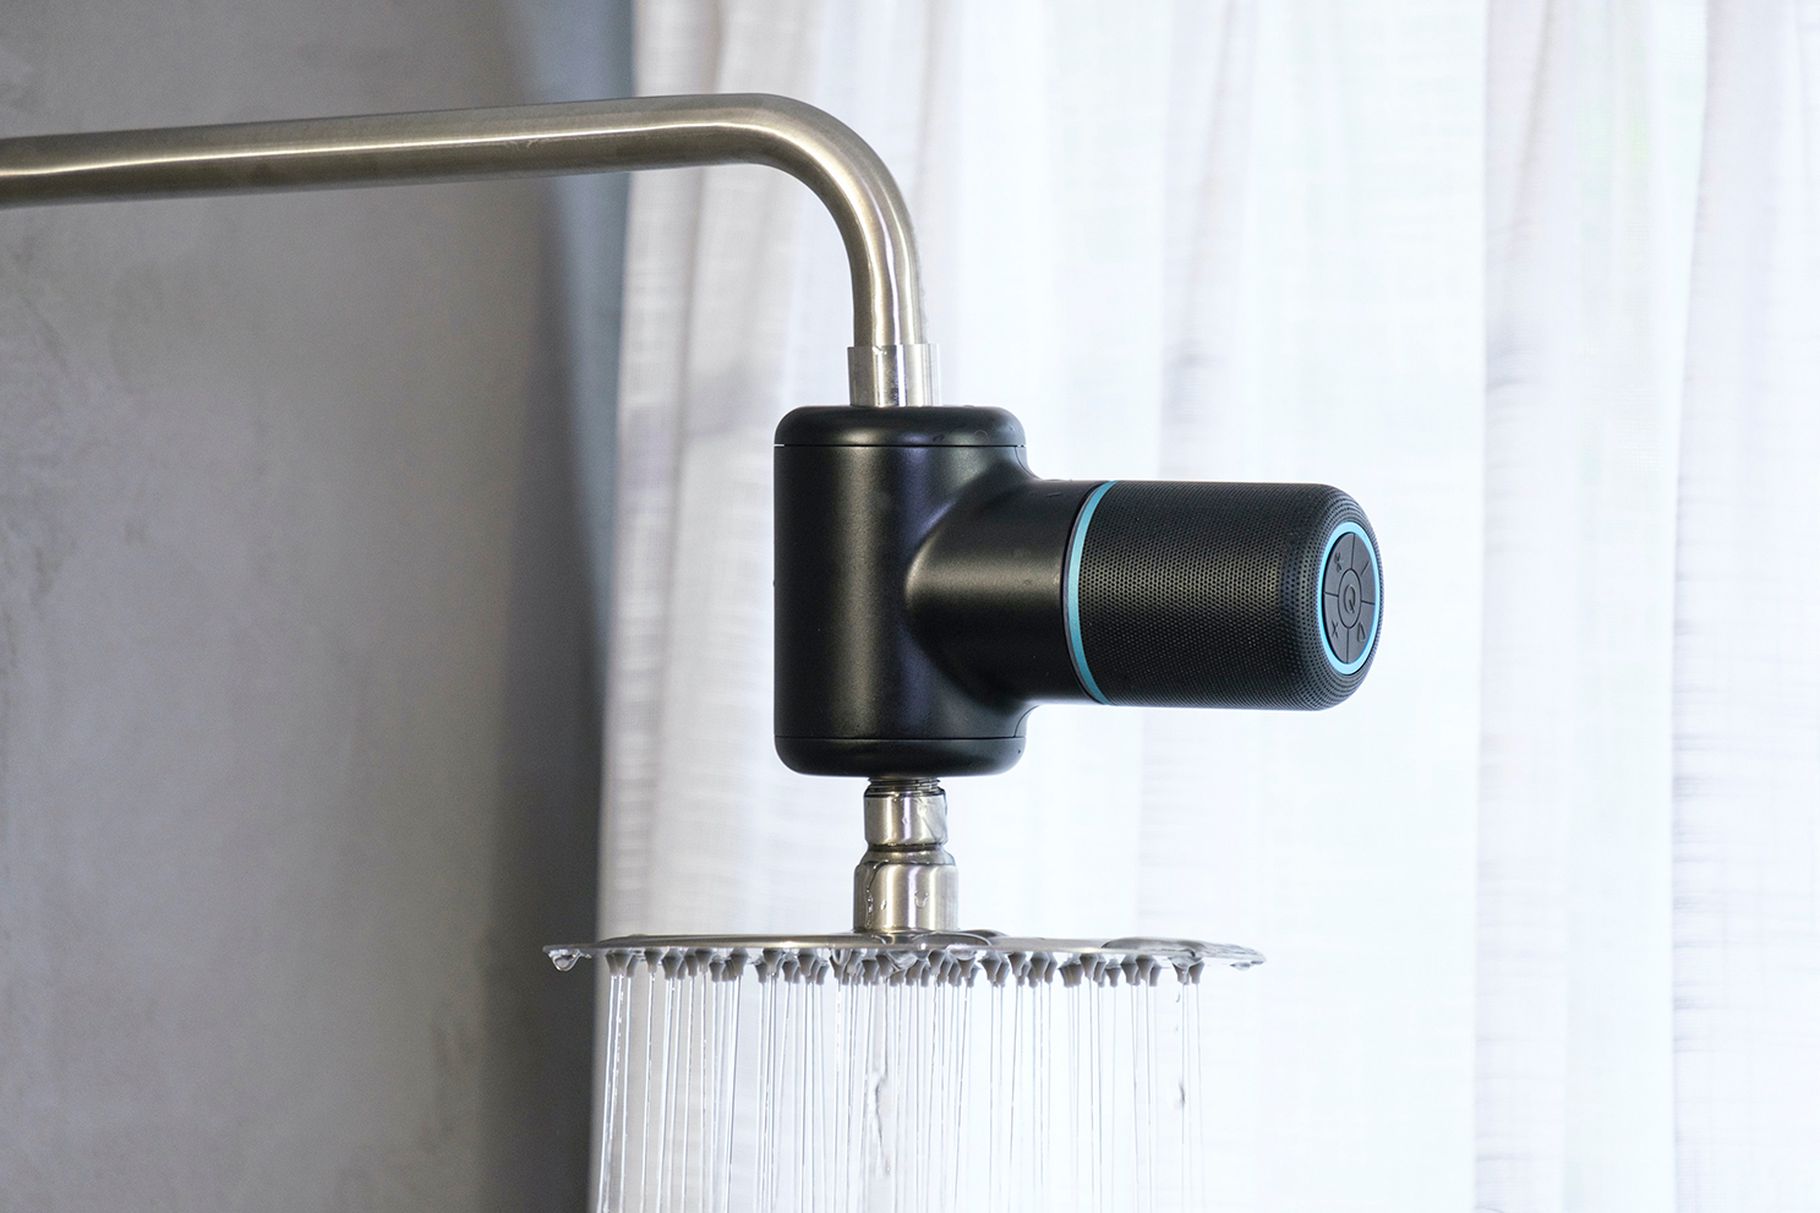 This water-powered shower head speaker could sing backup for your morning routine